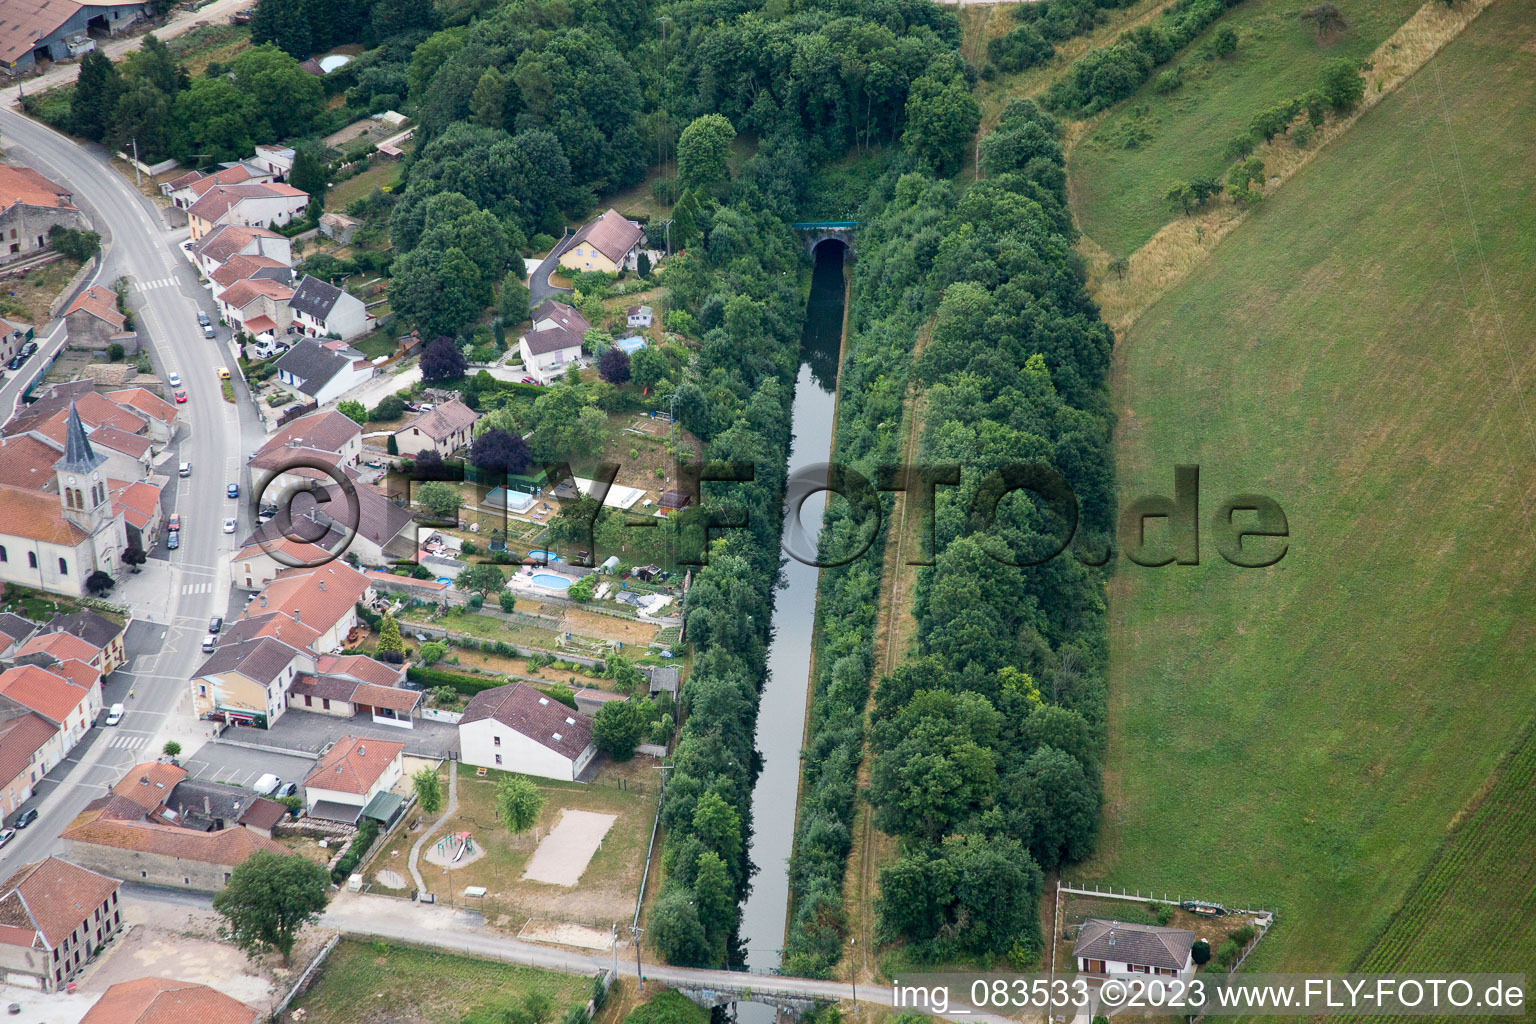 Aerial photograpy of Lay-Saint-Remy in the state Meurthe et Moselle, France